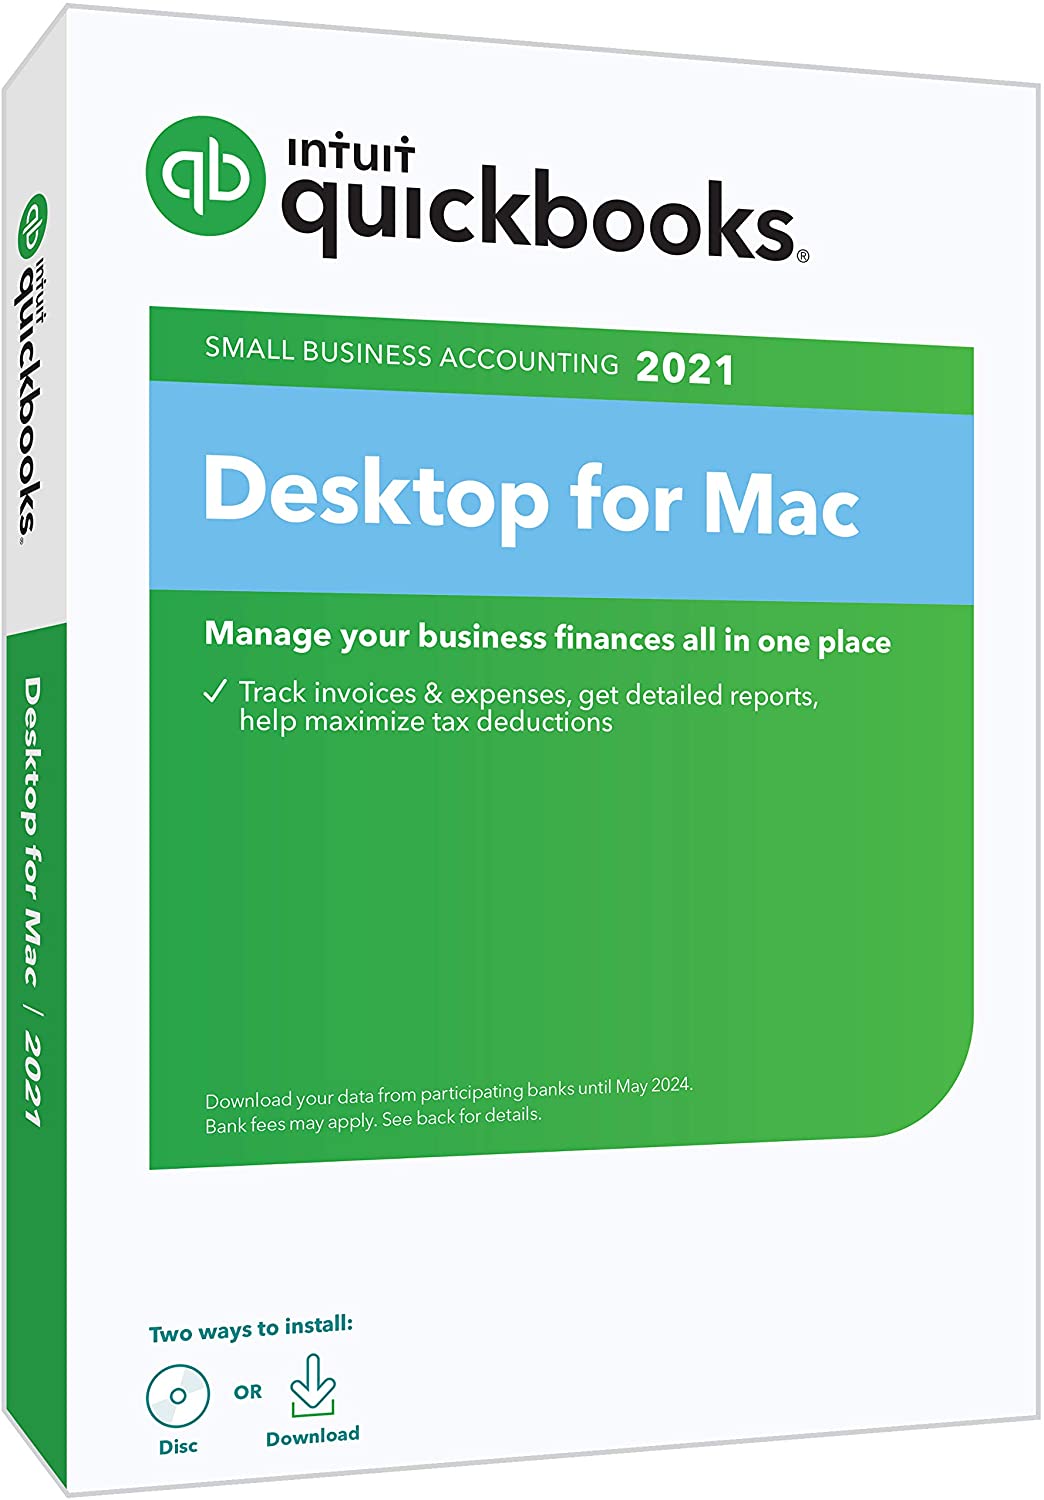 what is the difference between quickbooks for windows and mac